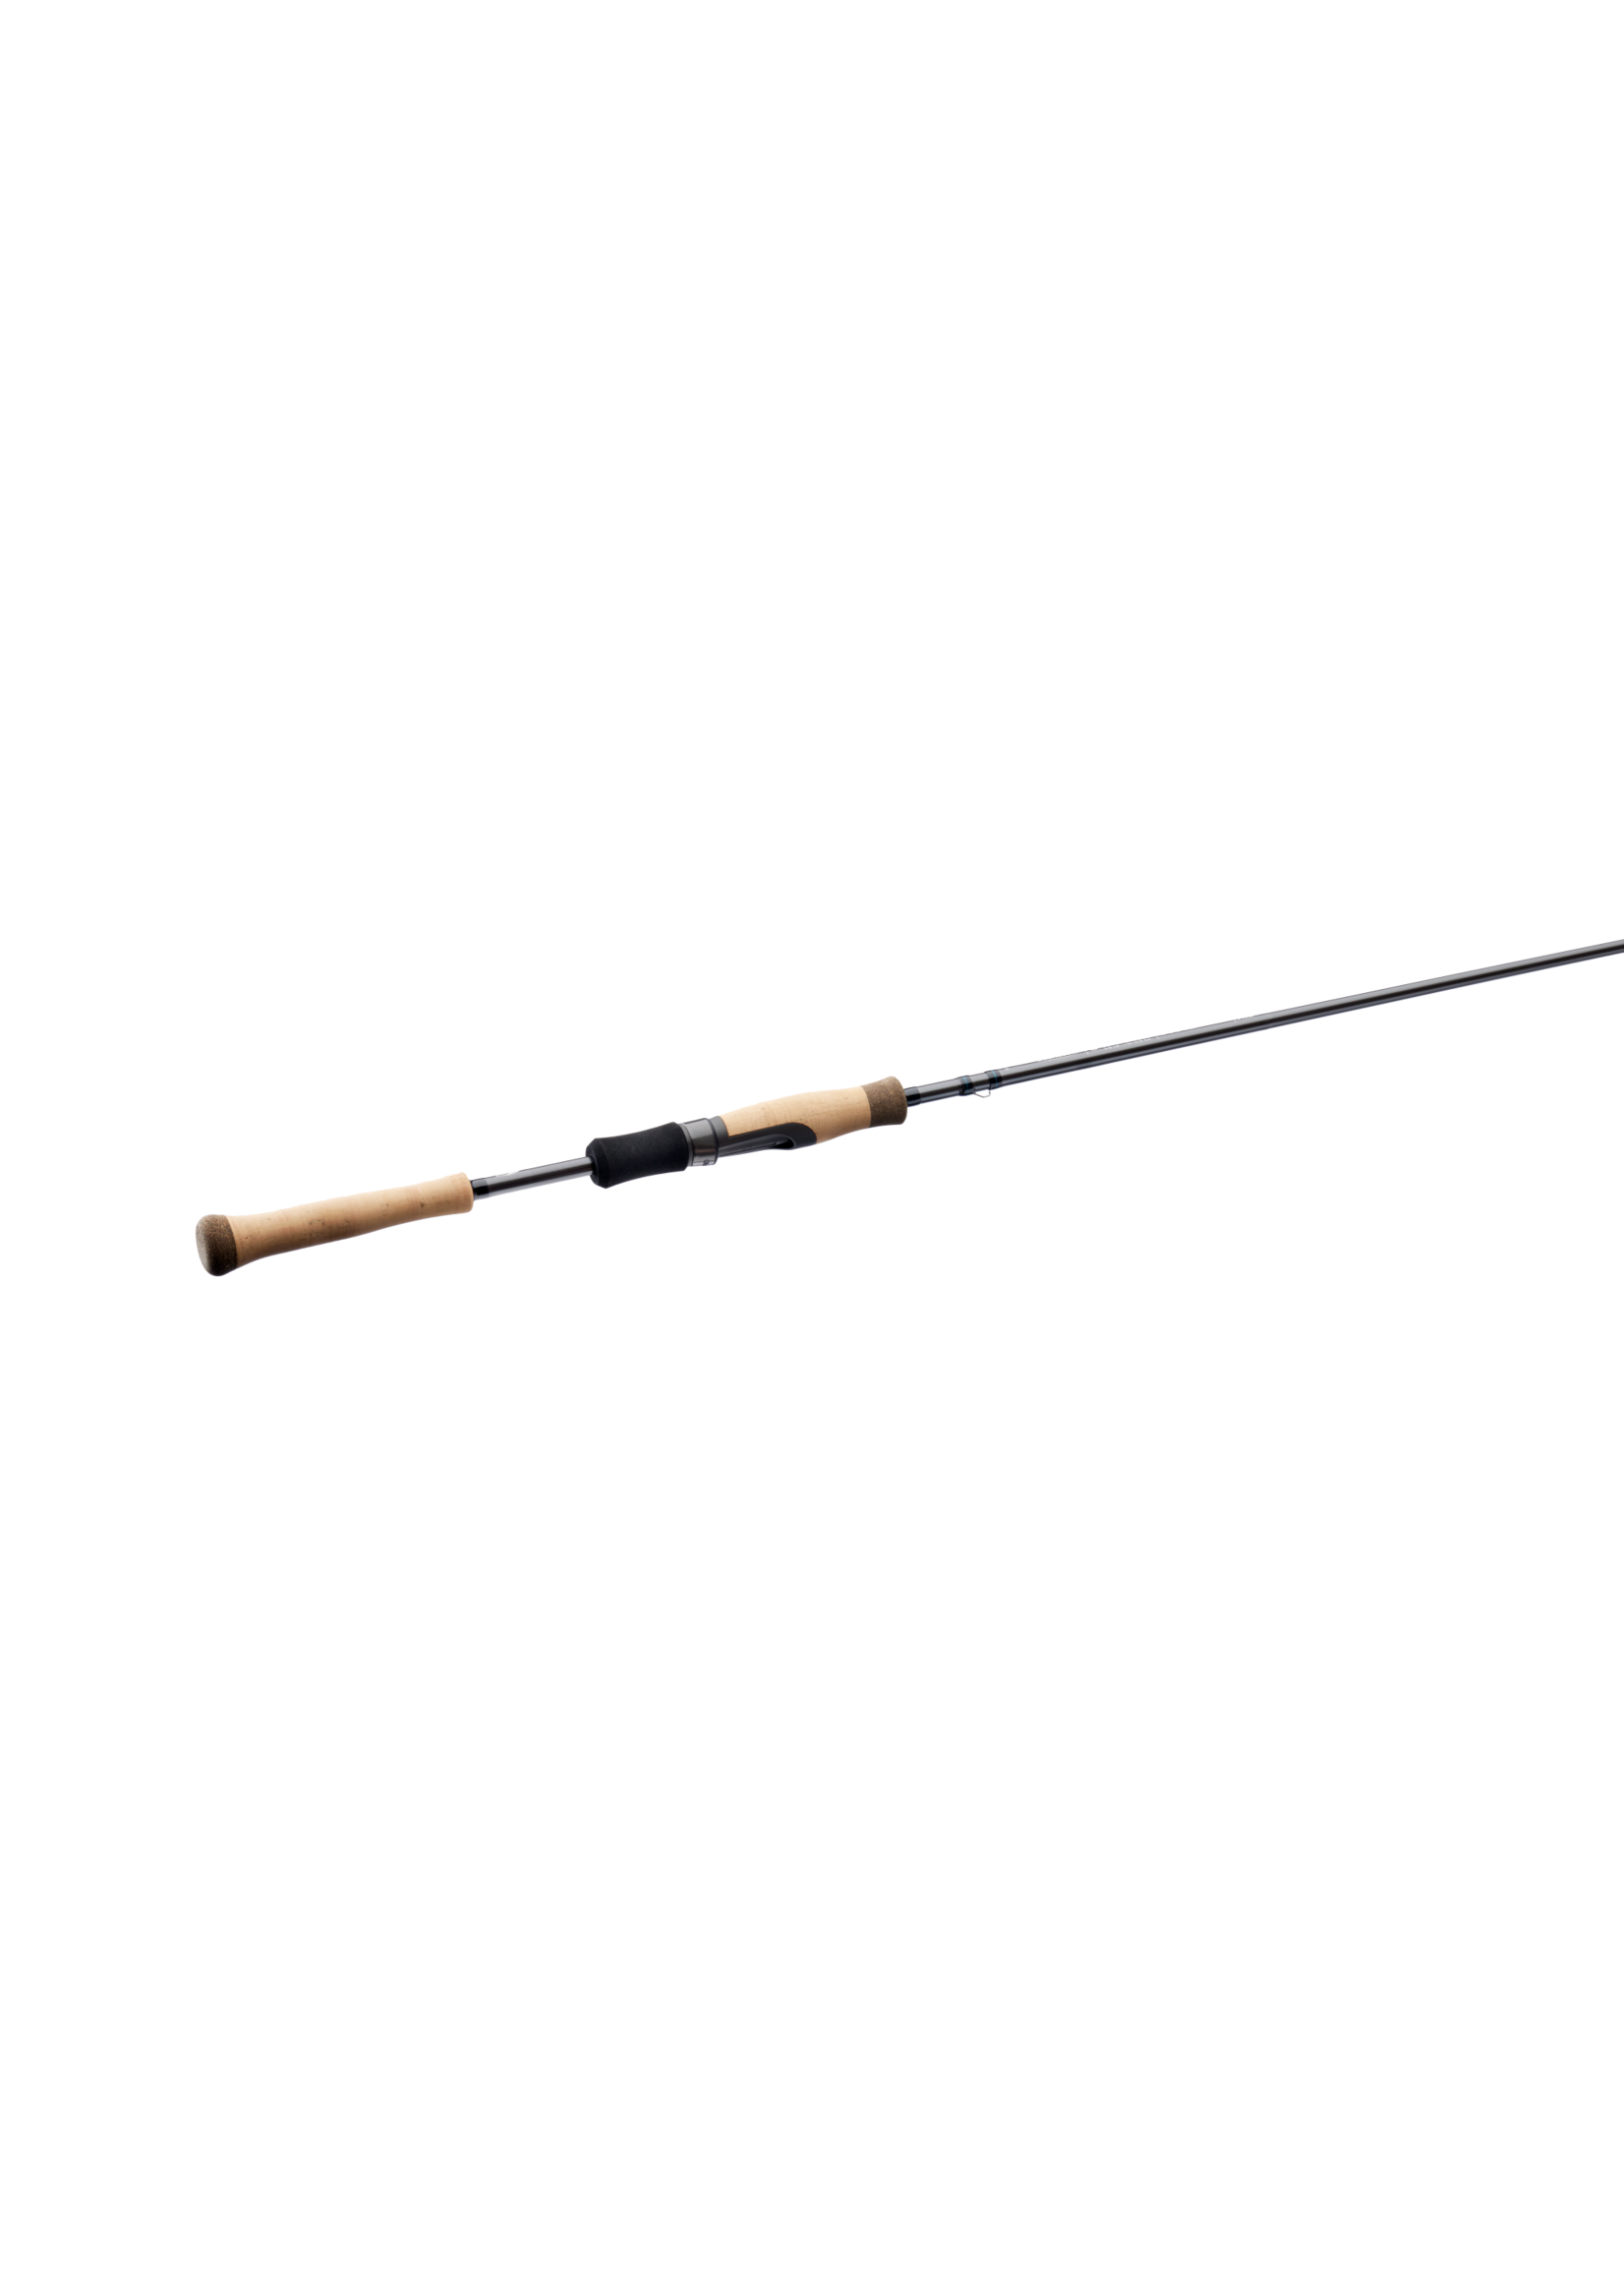 St. Croix Avid Series Walleye Spinning Rod - Tackle Shack